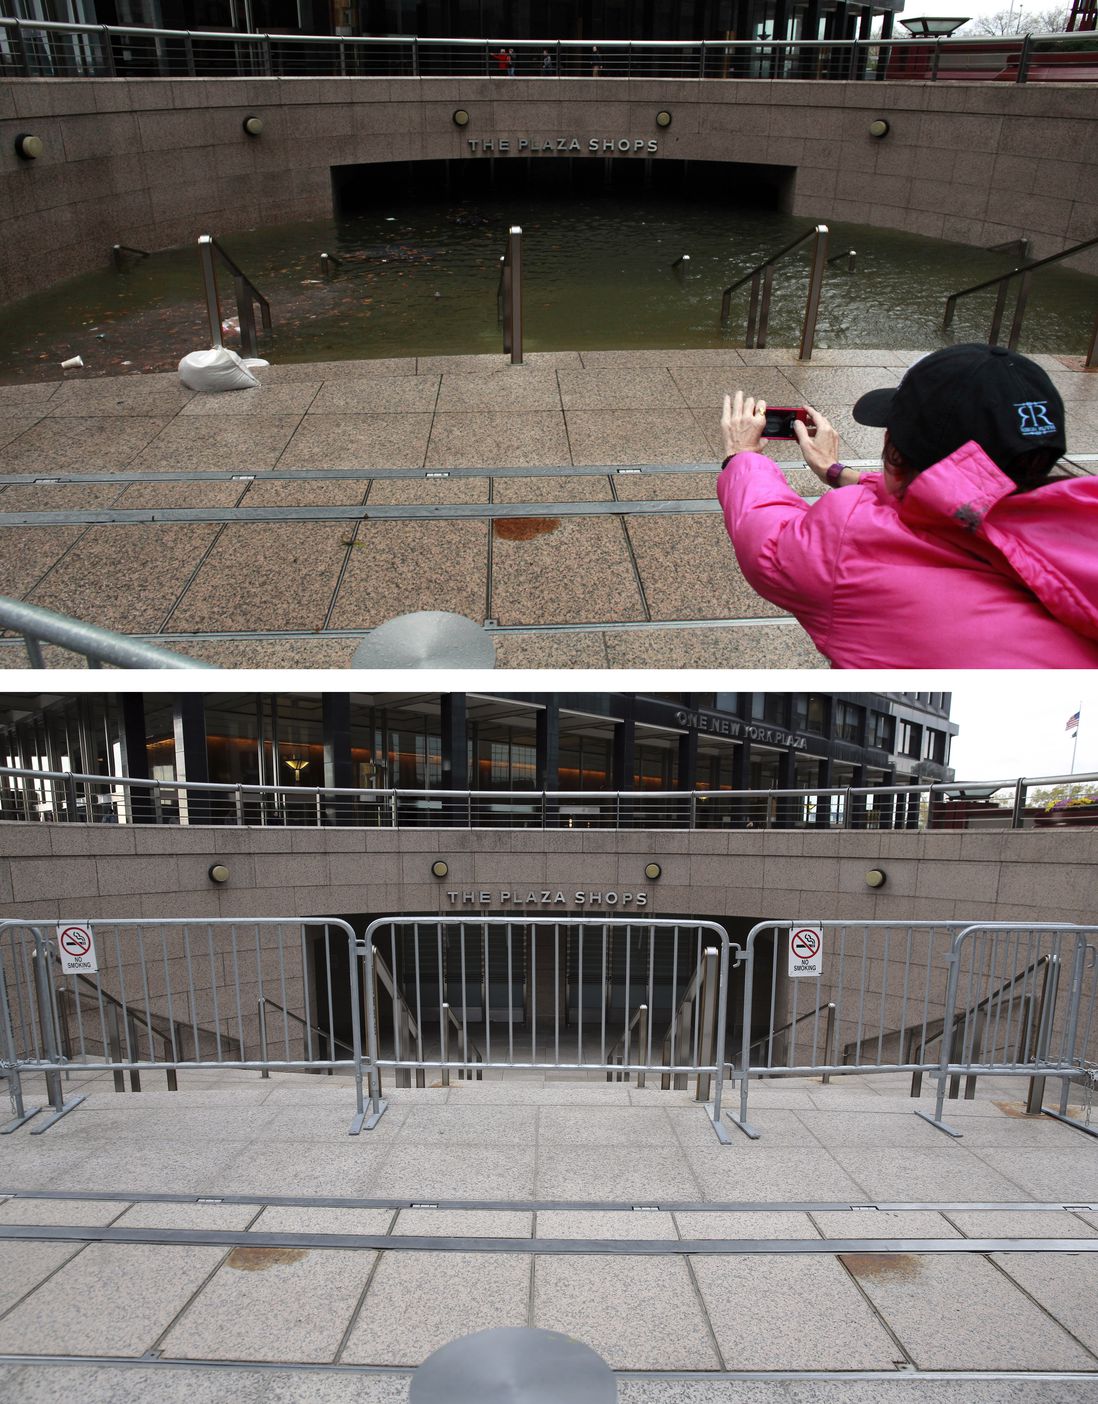 [Top] Water floods the Plaza Shops in the wake of Hurricane Sandy on October 30, 2012 in New York City. [Bottom] The underground Plaza Shops in lower Manhattan remain closed due to flooding from Hurricane Sandy almost a year after the storm on October 22, 2013.